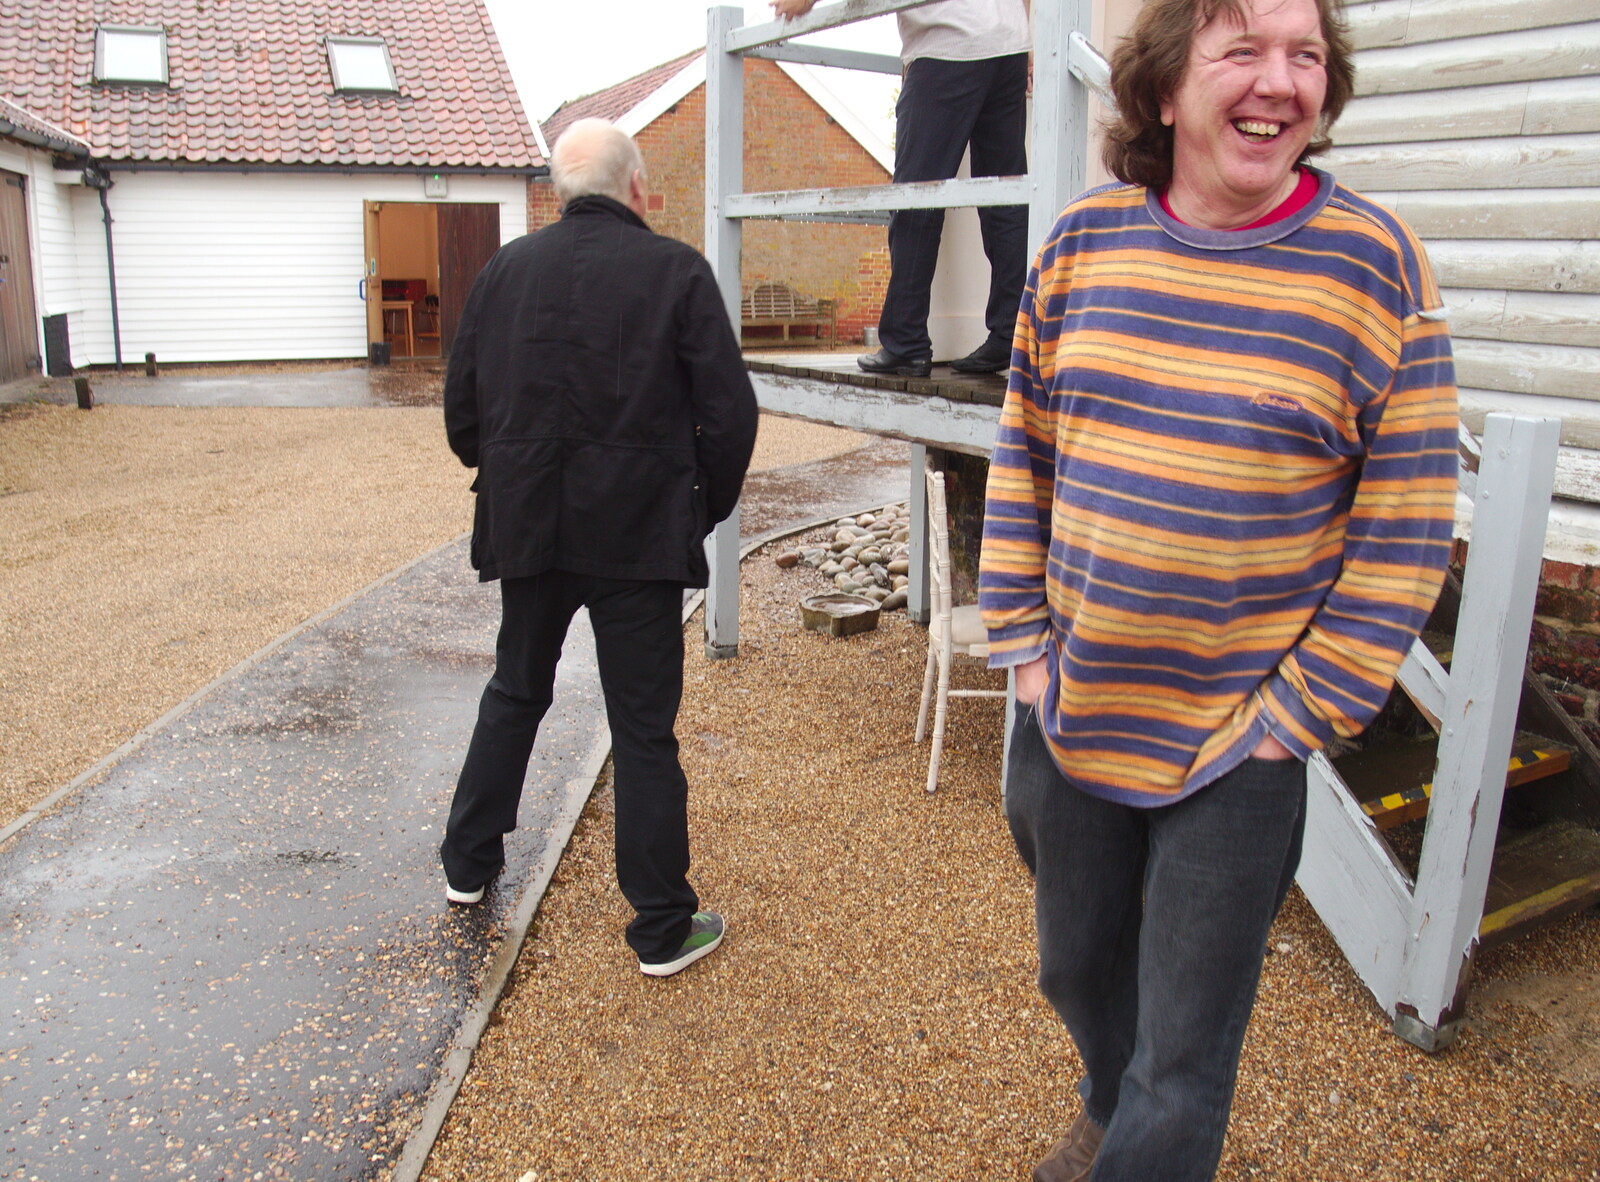 We break outside for a bit from The BBs Play Scrabble at Wingfield Barns, Wingfield, Suffolk - 24th May 2014